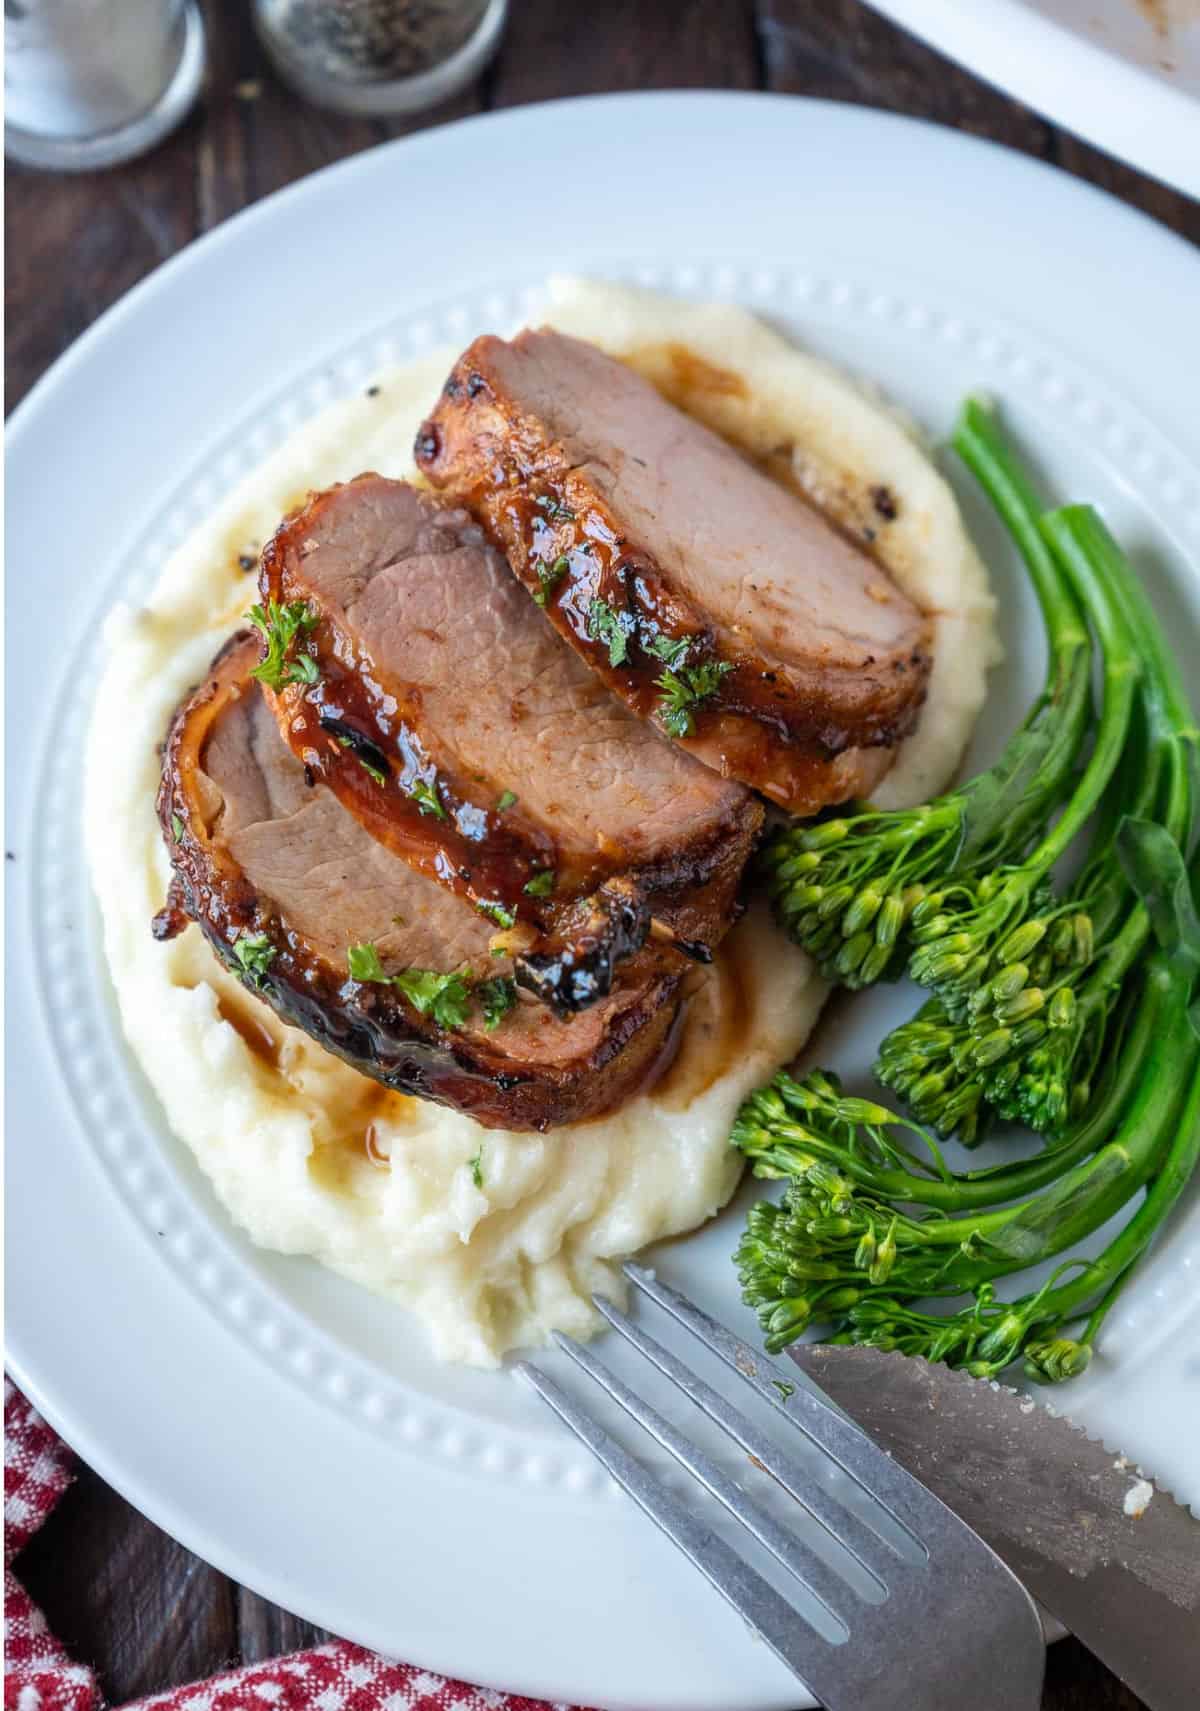 Three slices of pork placed on some mashed potatoes.